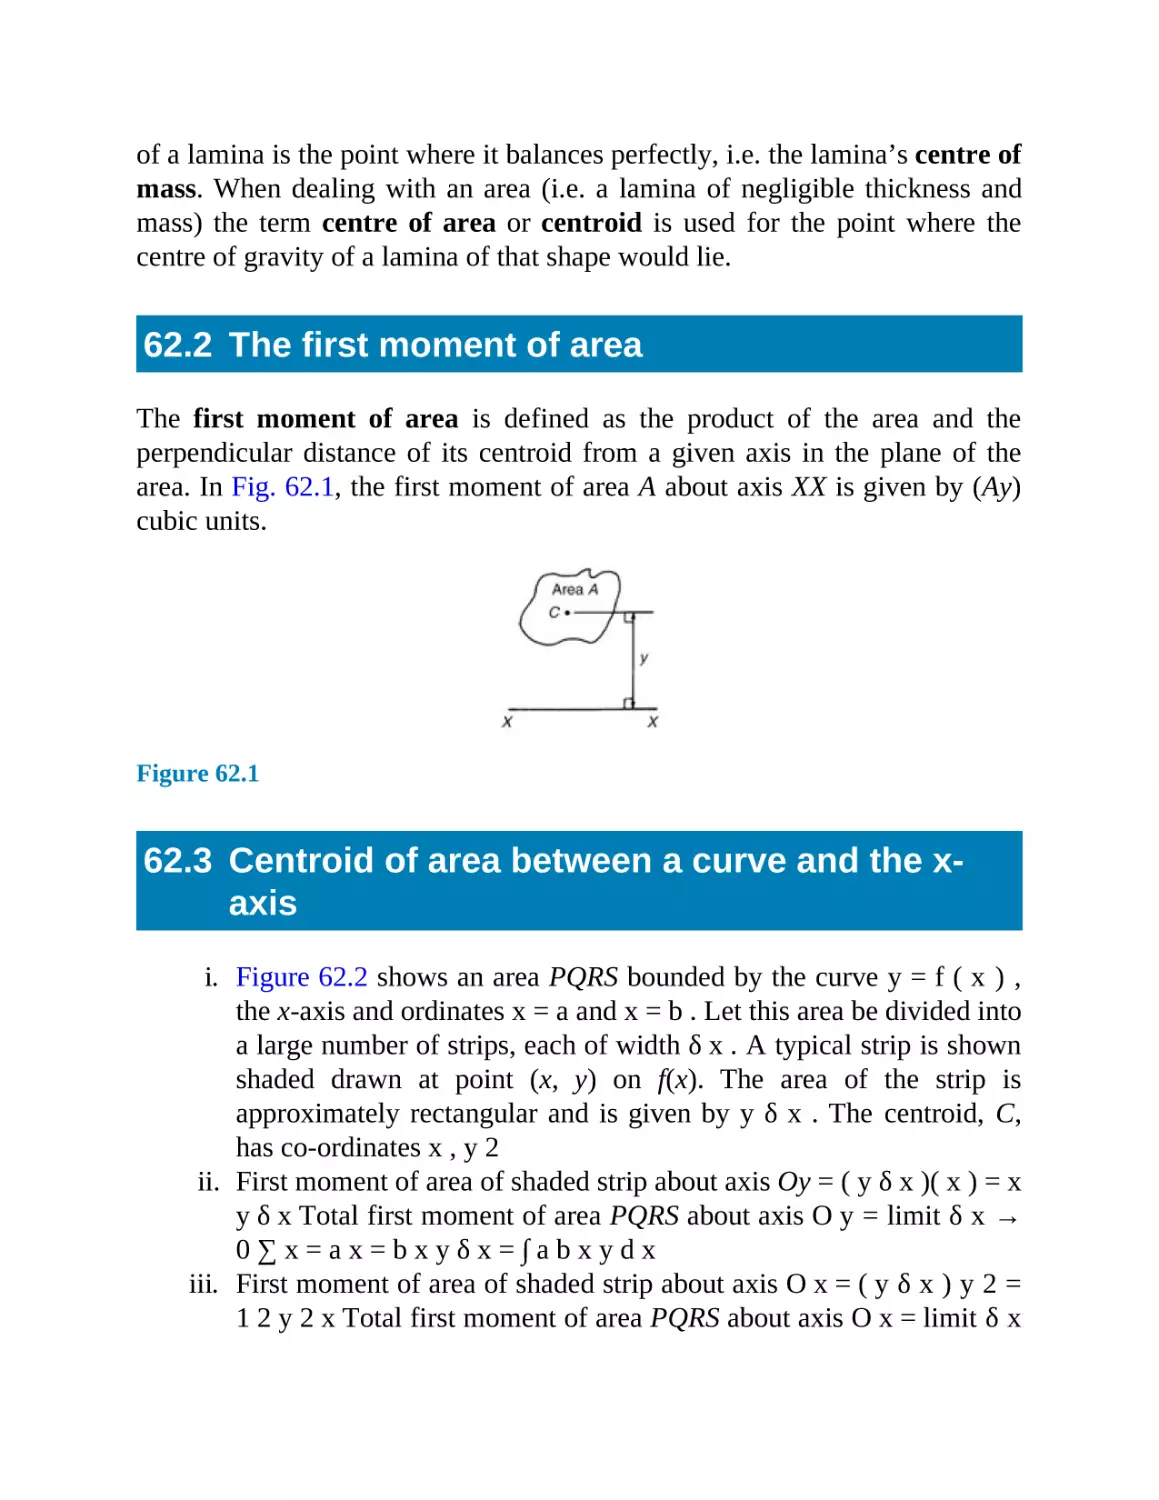 62.2 The first moment of area
62.3 Centroid of area between a curve and the x-axis